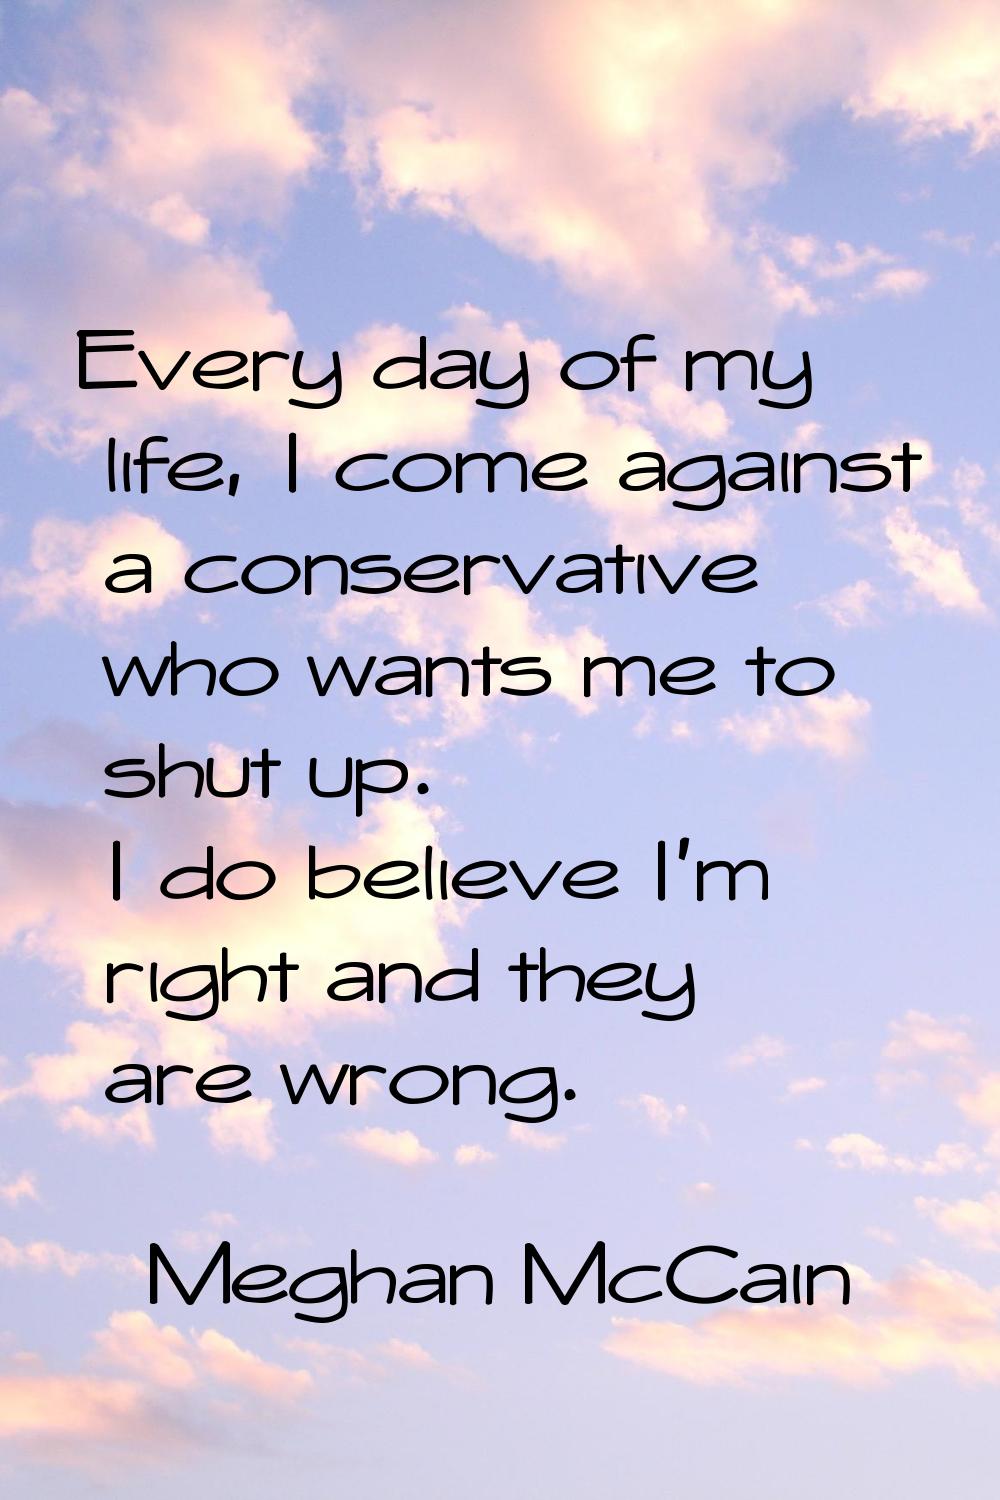 Every day of my life, I come against a conservative who wants me to shut up. I do believe I'm right